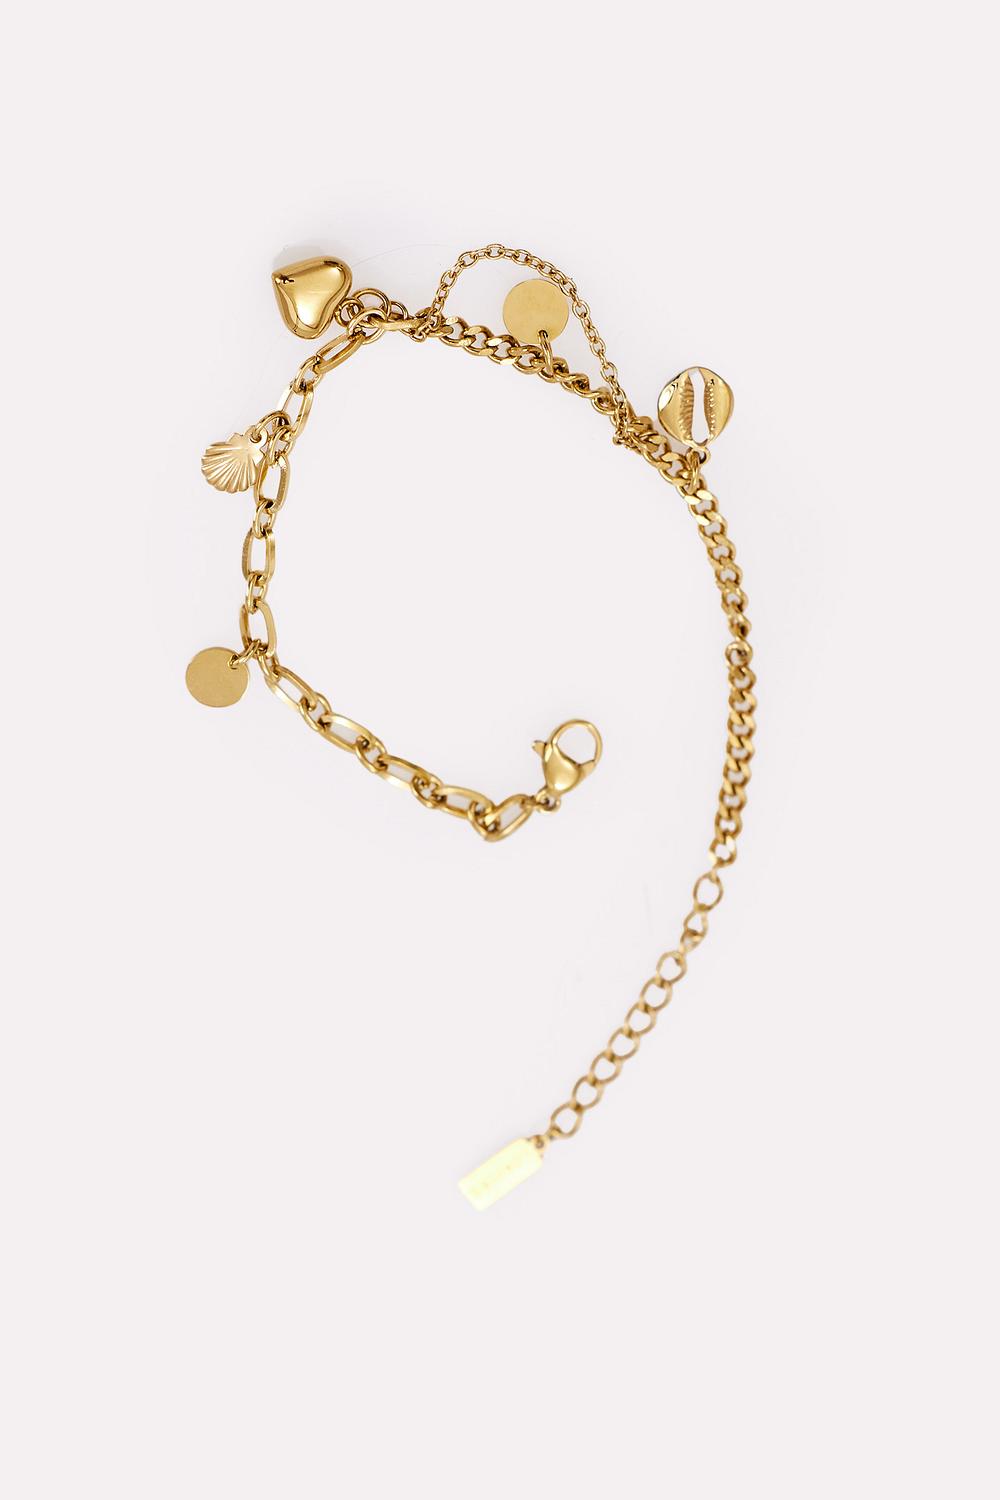 Golden bracelet with different charms